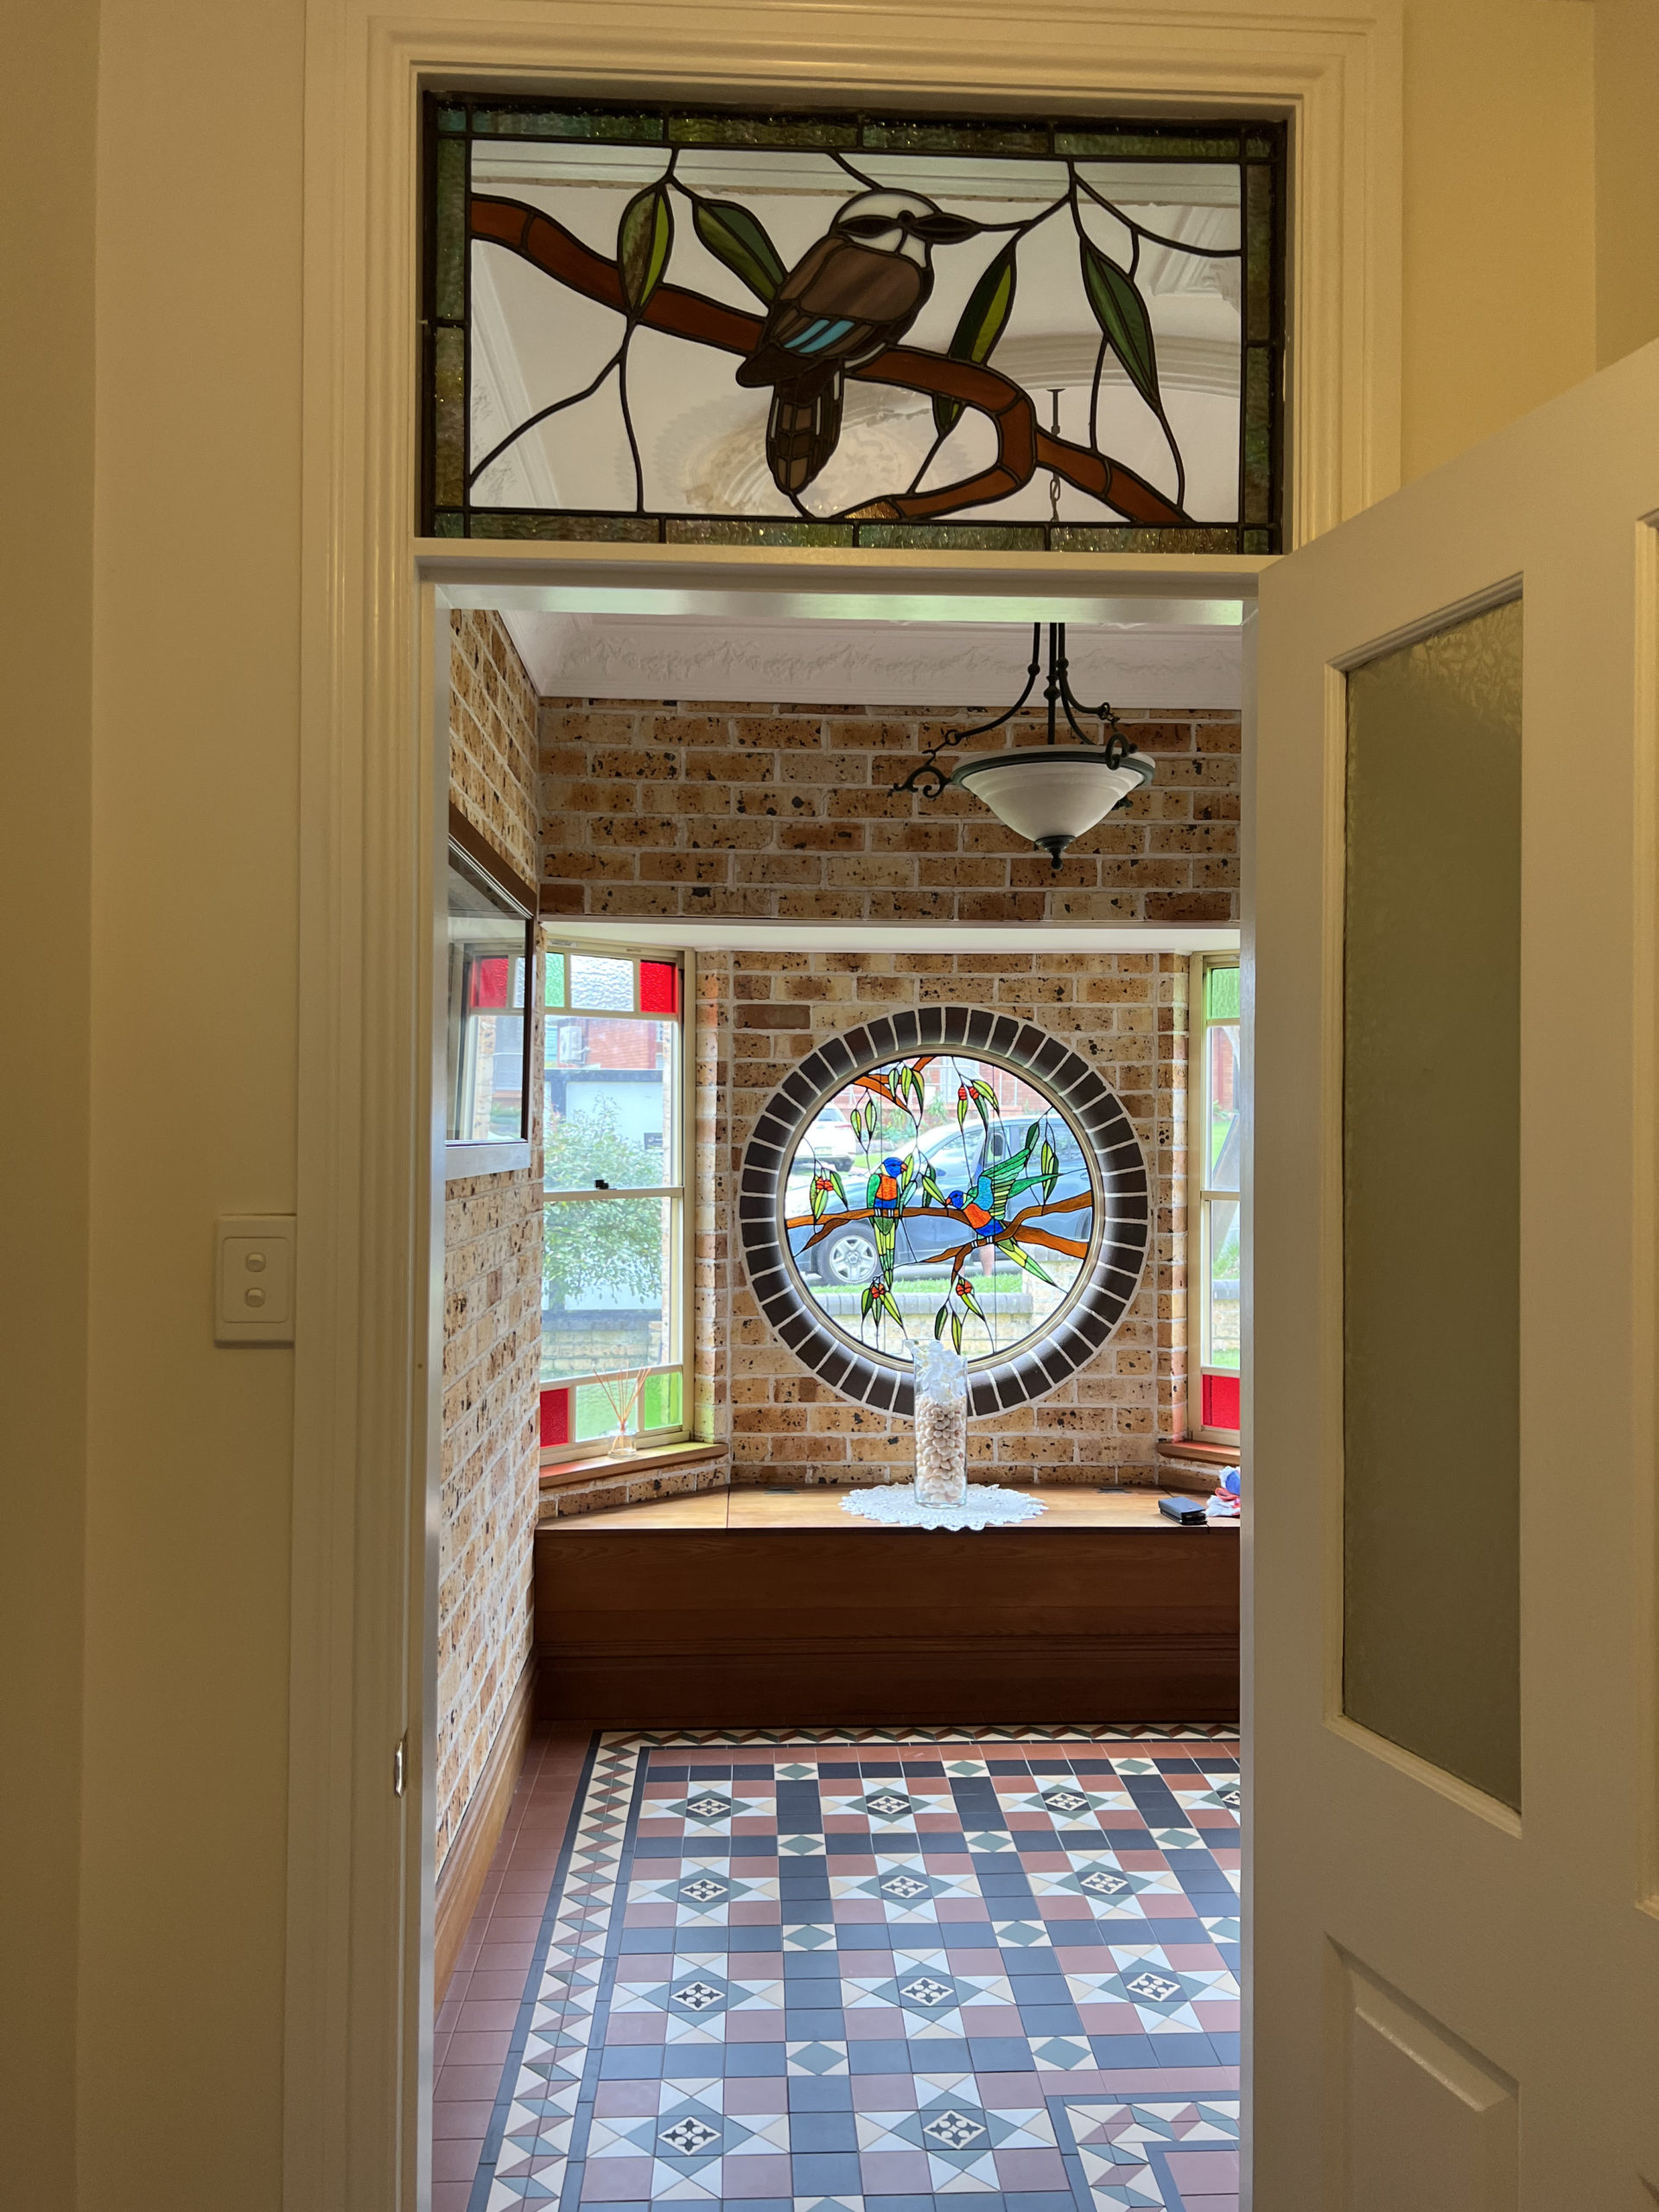 view of the round lorikeet window and over-door kookaburra window, looking out from entrance hall